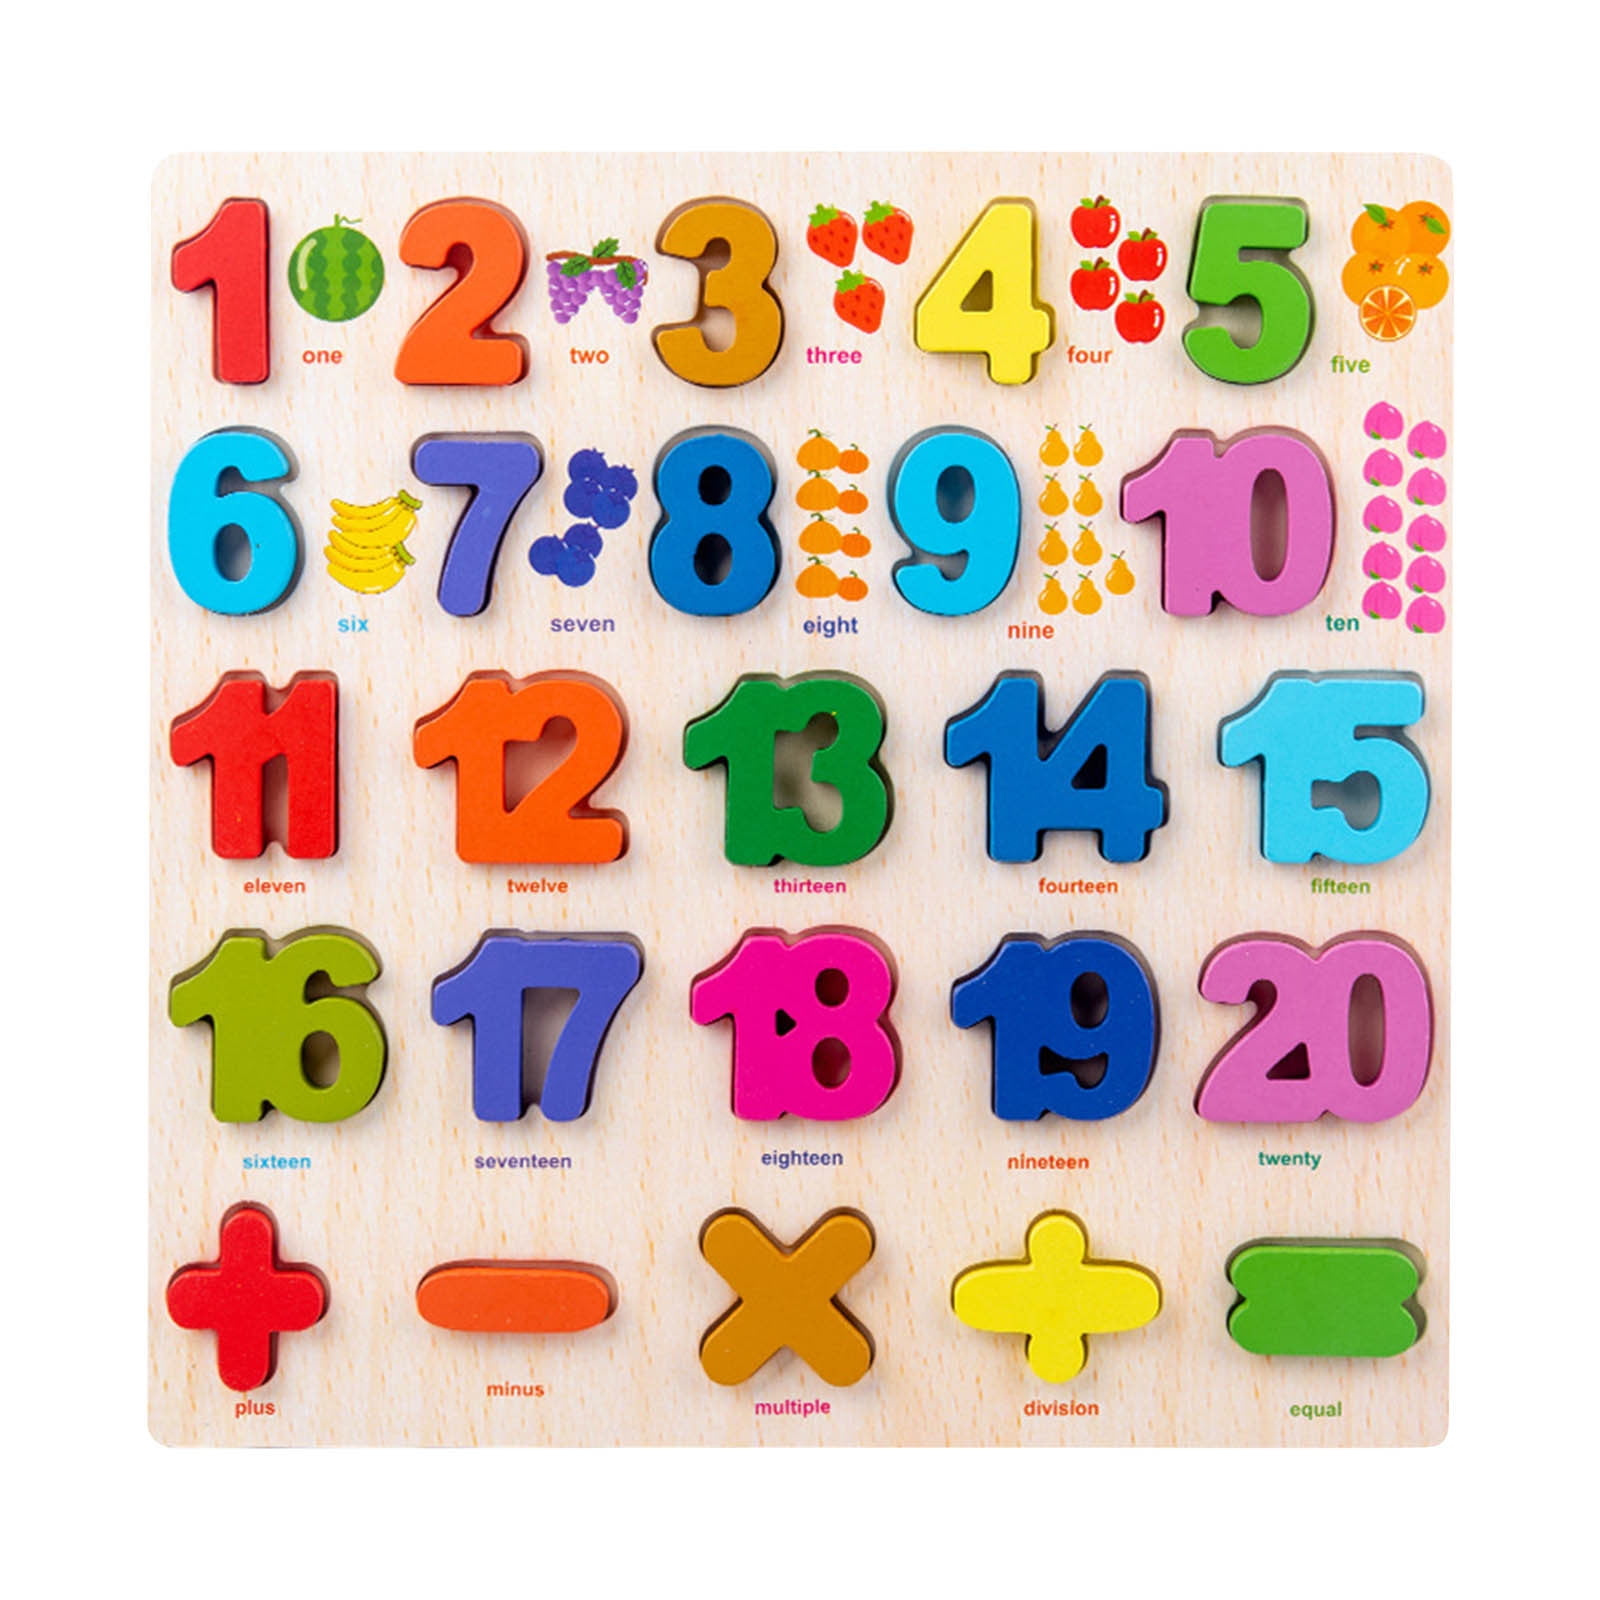 3 Puzzles Puzzle ABC 123 Alphabet Number Bright Pink Homeschool Educational New 